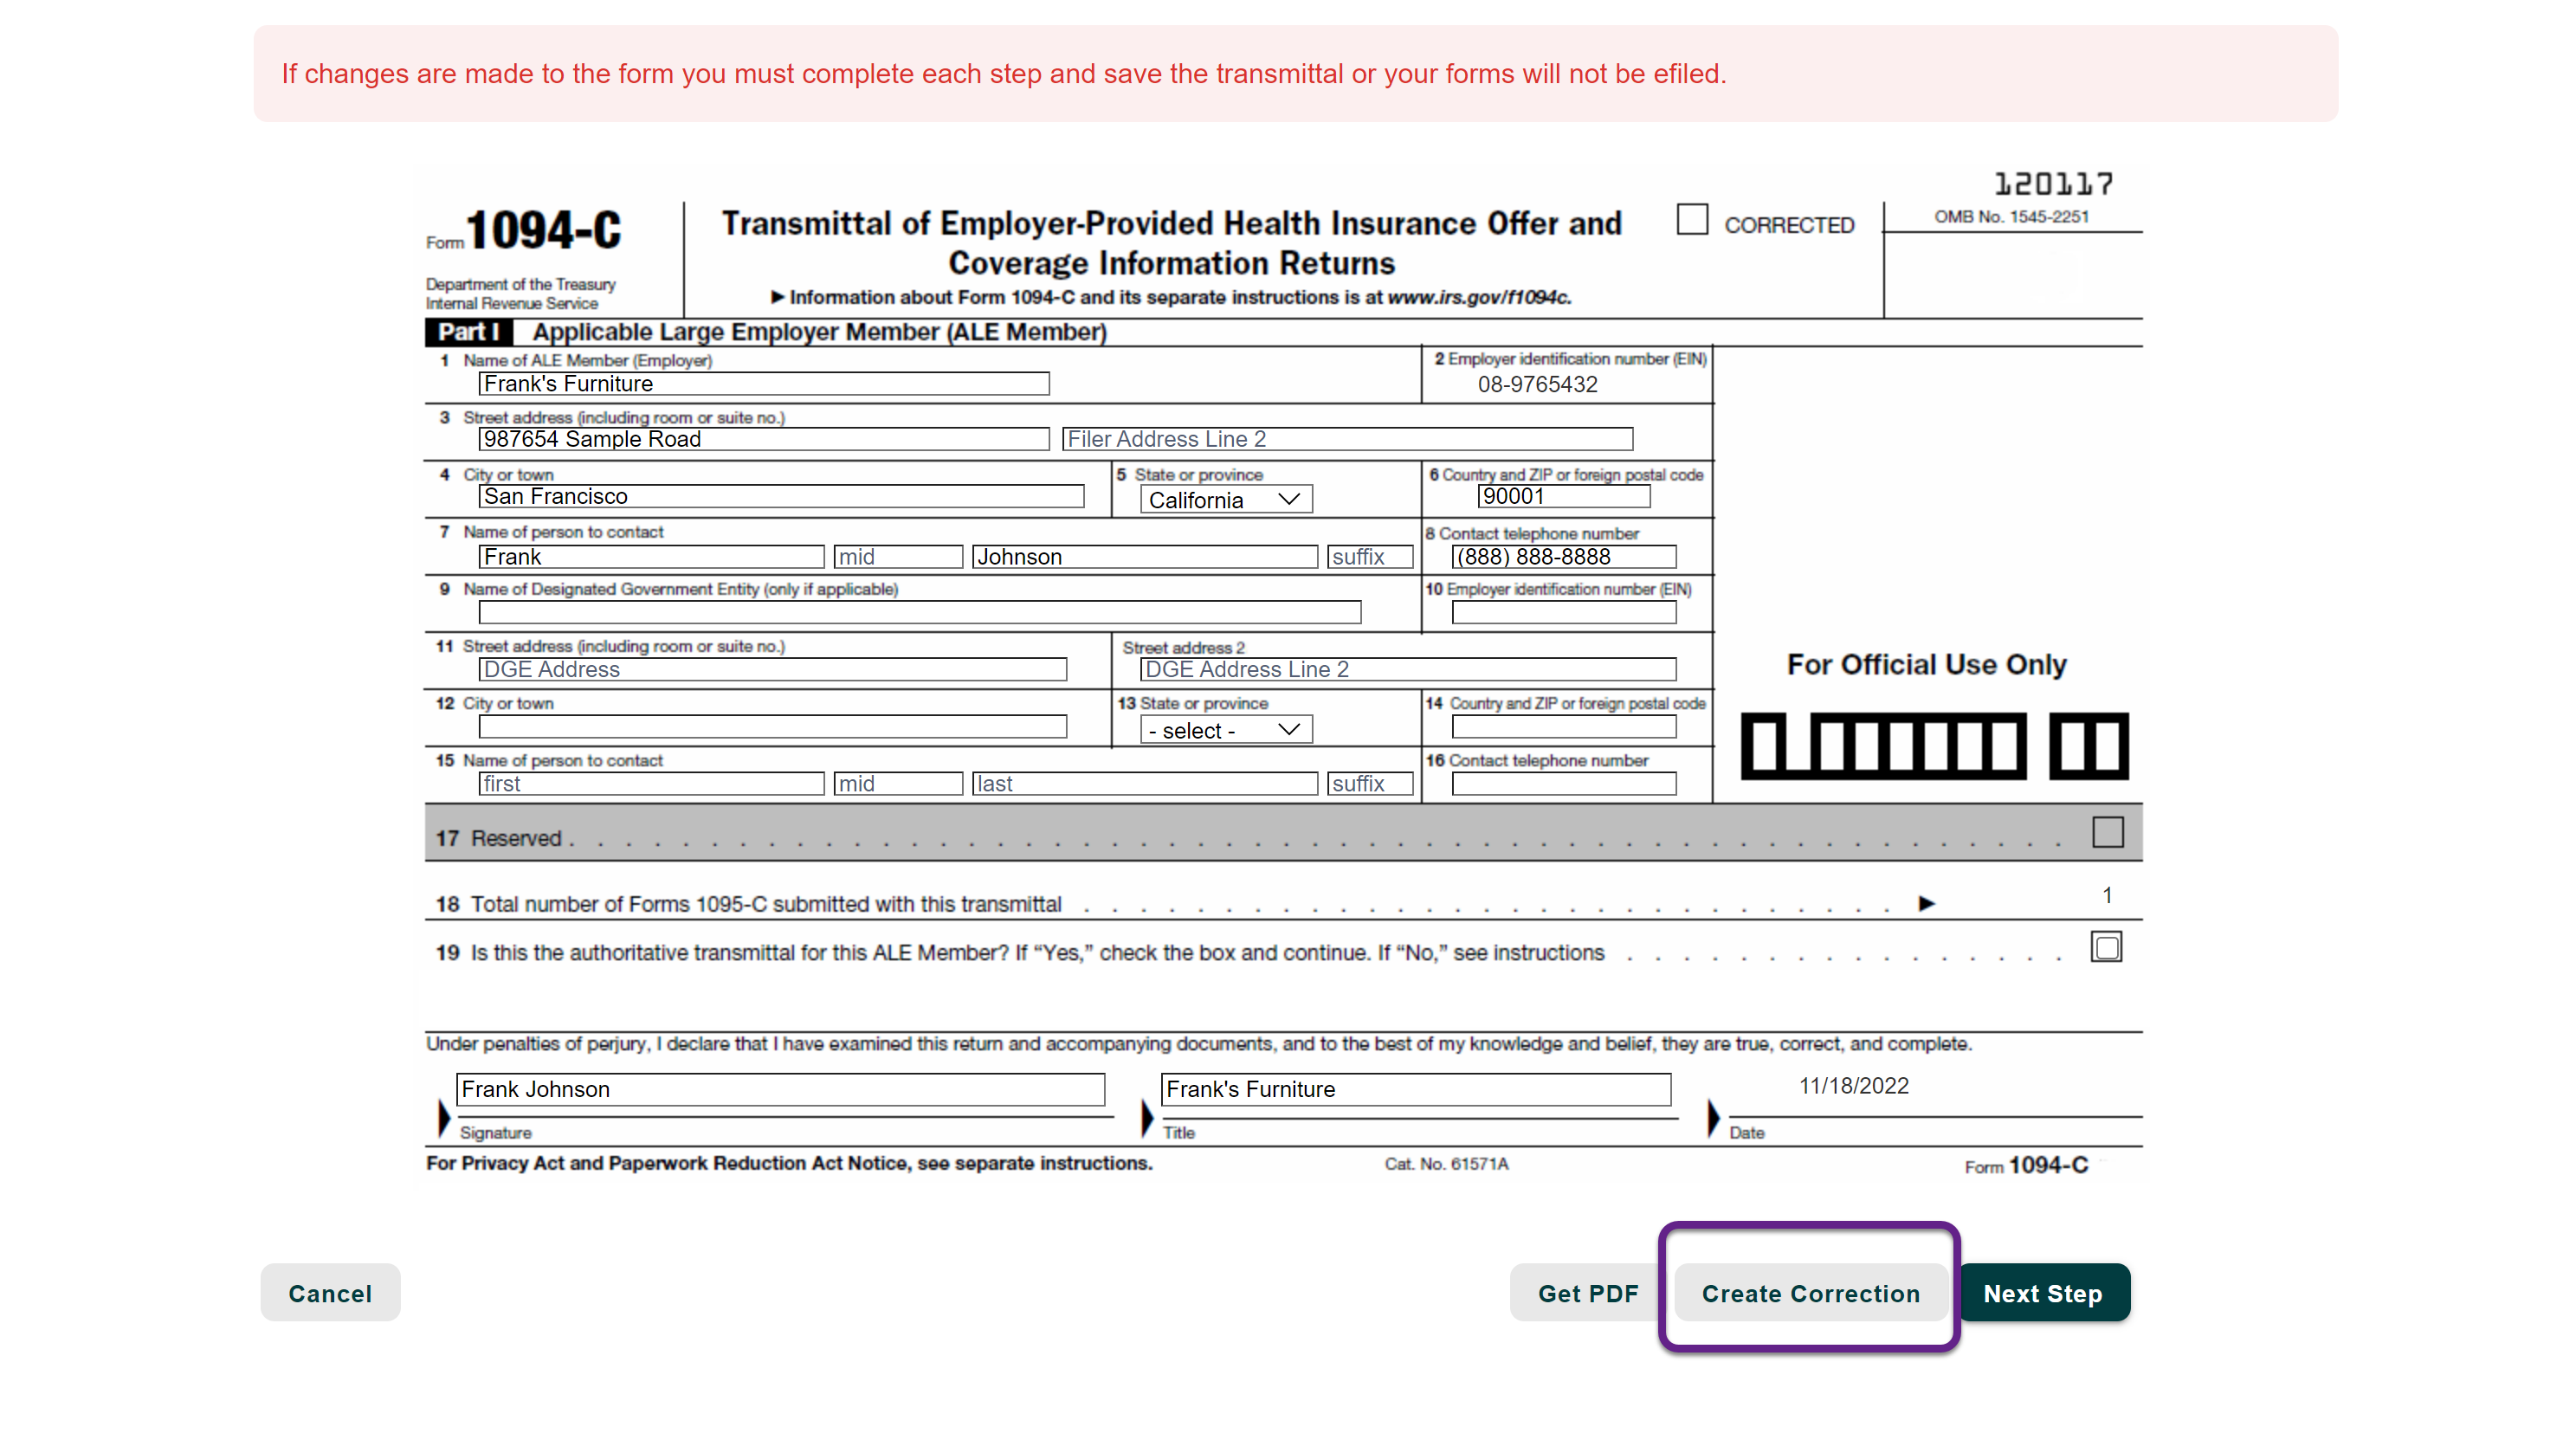 Image of an example 1094-C correction form with a callout on the Create Correction button.